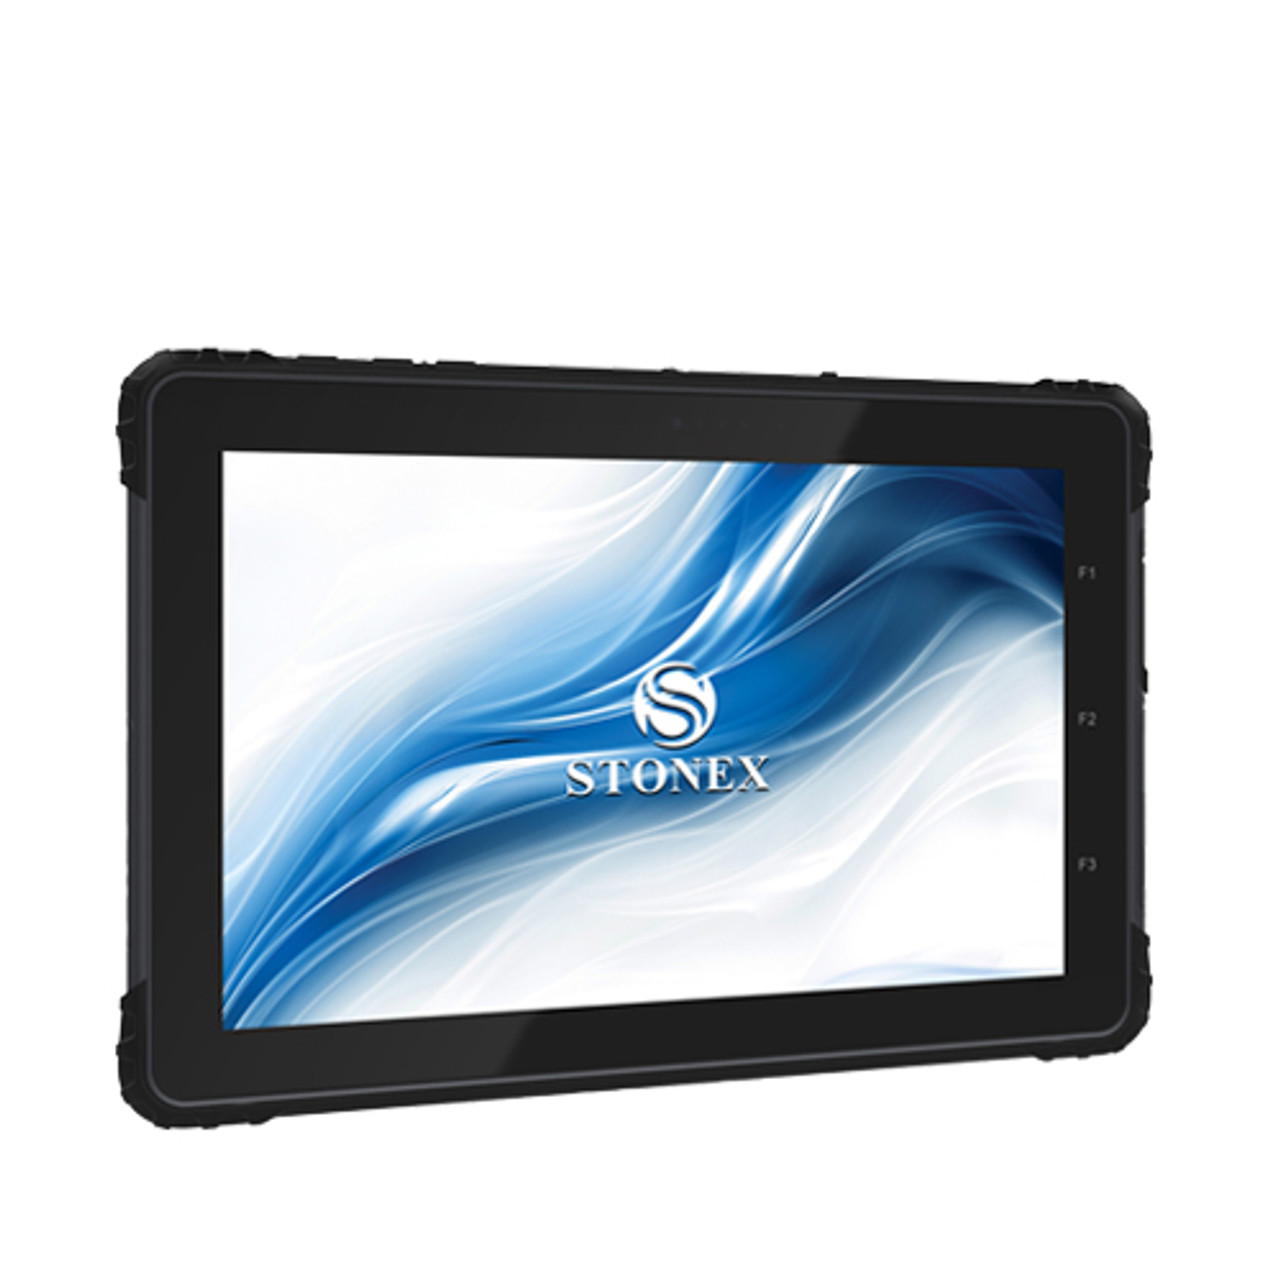 STONEX UT56 10.1" Android Rugged Tablet